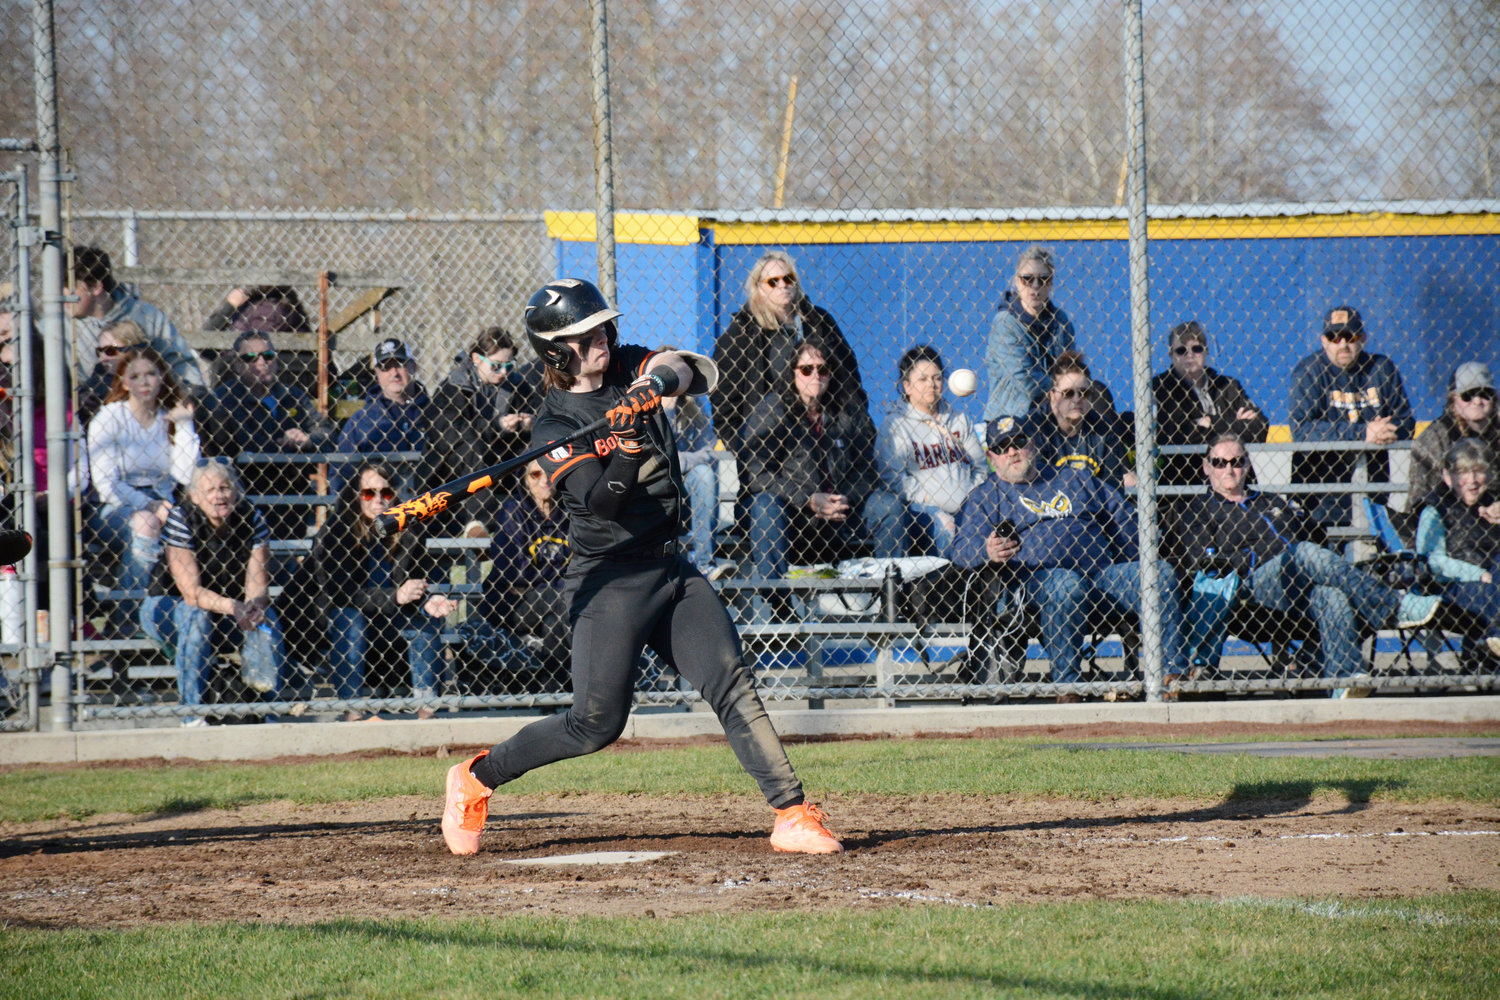 Axel Puls at bat in Blaine’s 23-15 loss to Ferndale High School March 21.